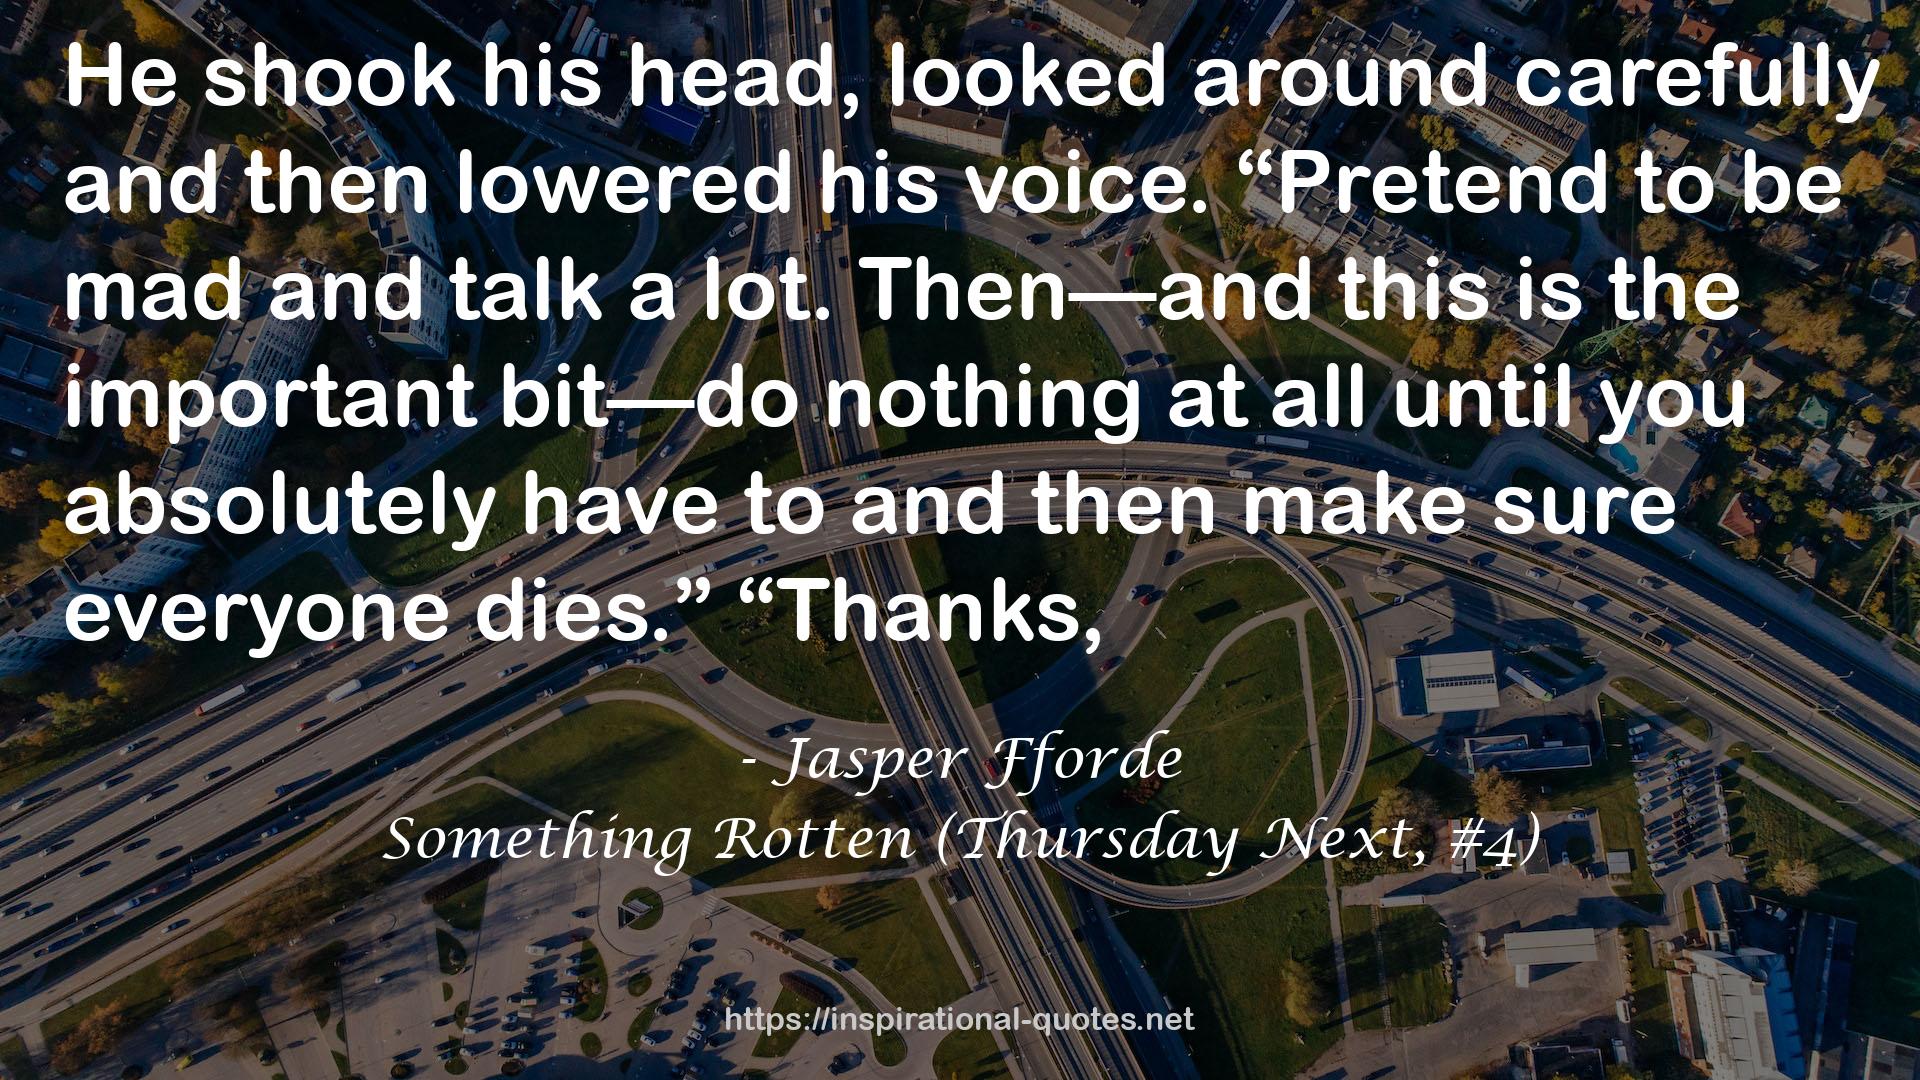 Something Rotten (Thursday Next, #4) QUOTES